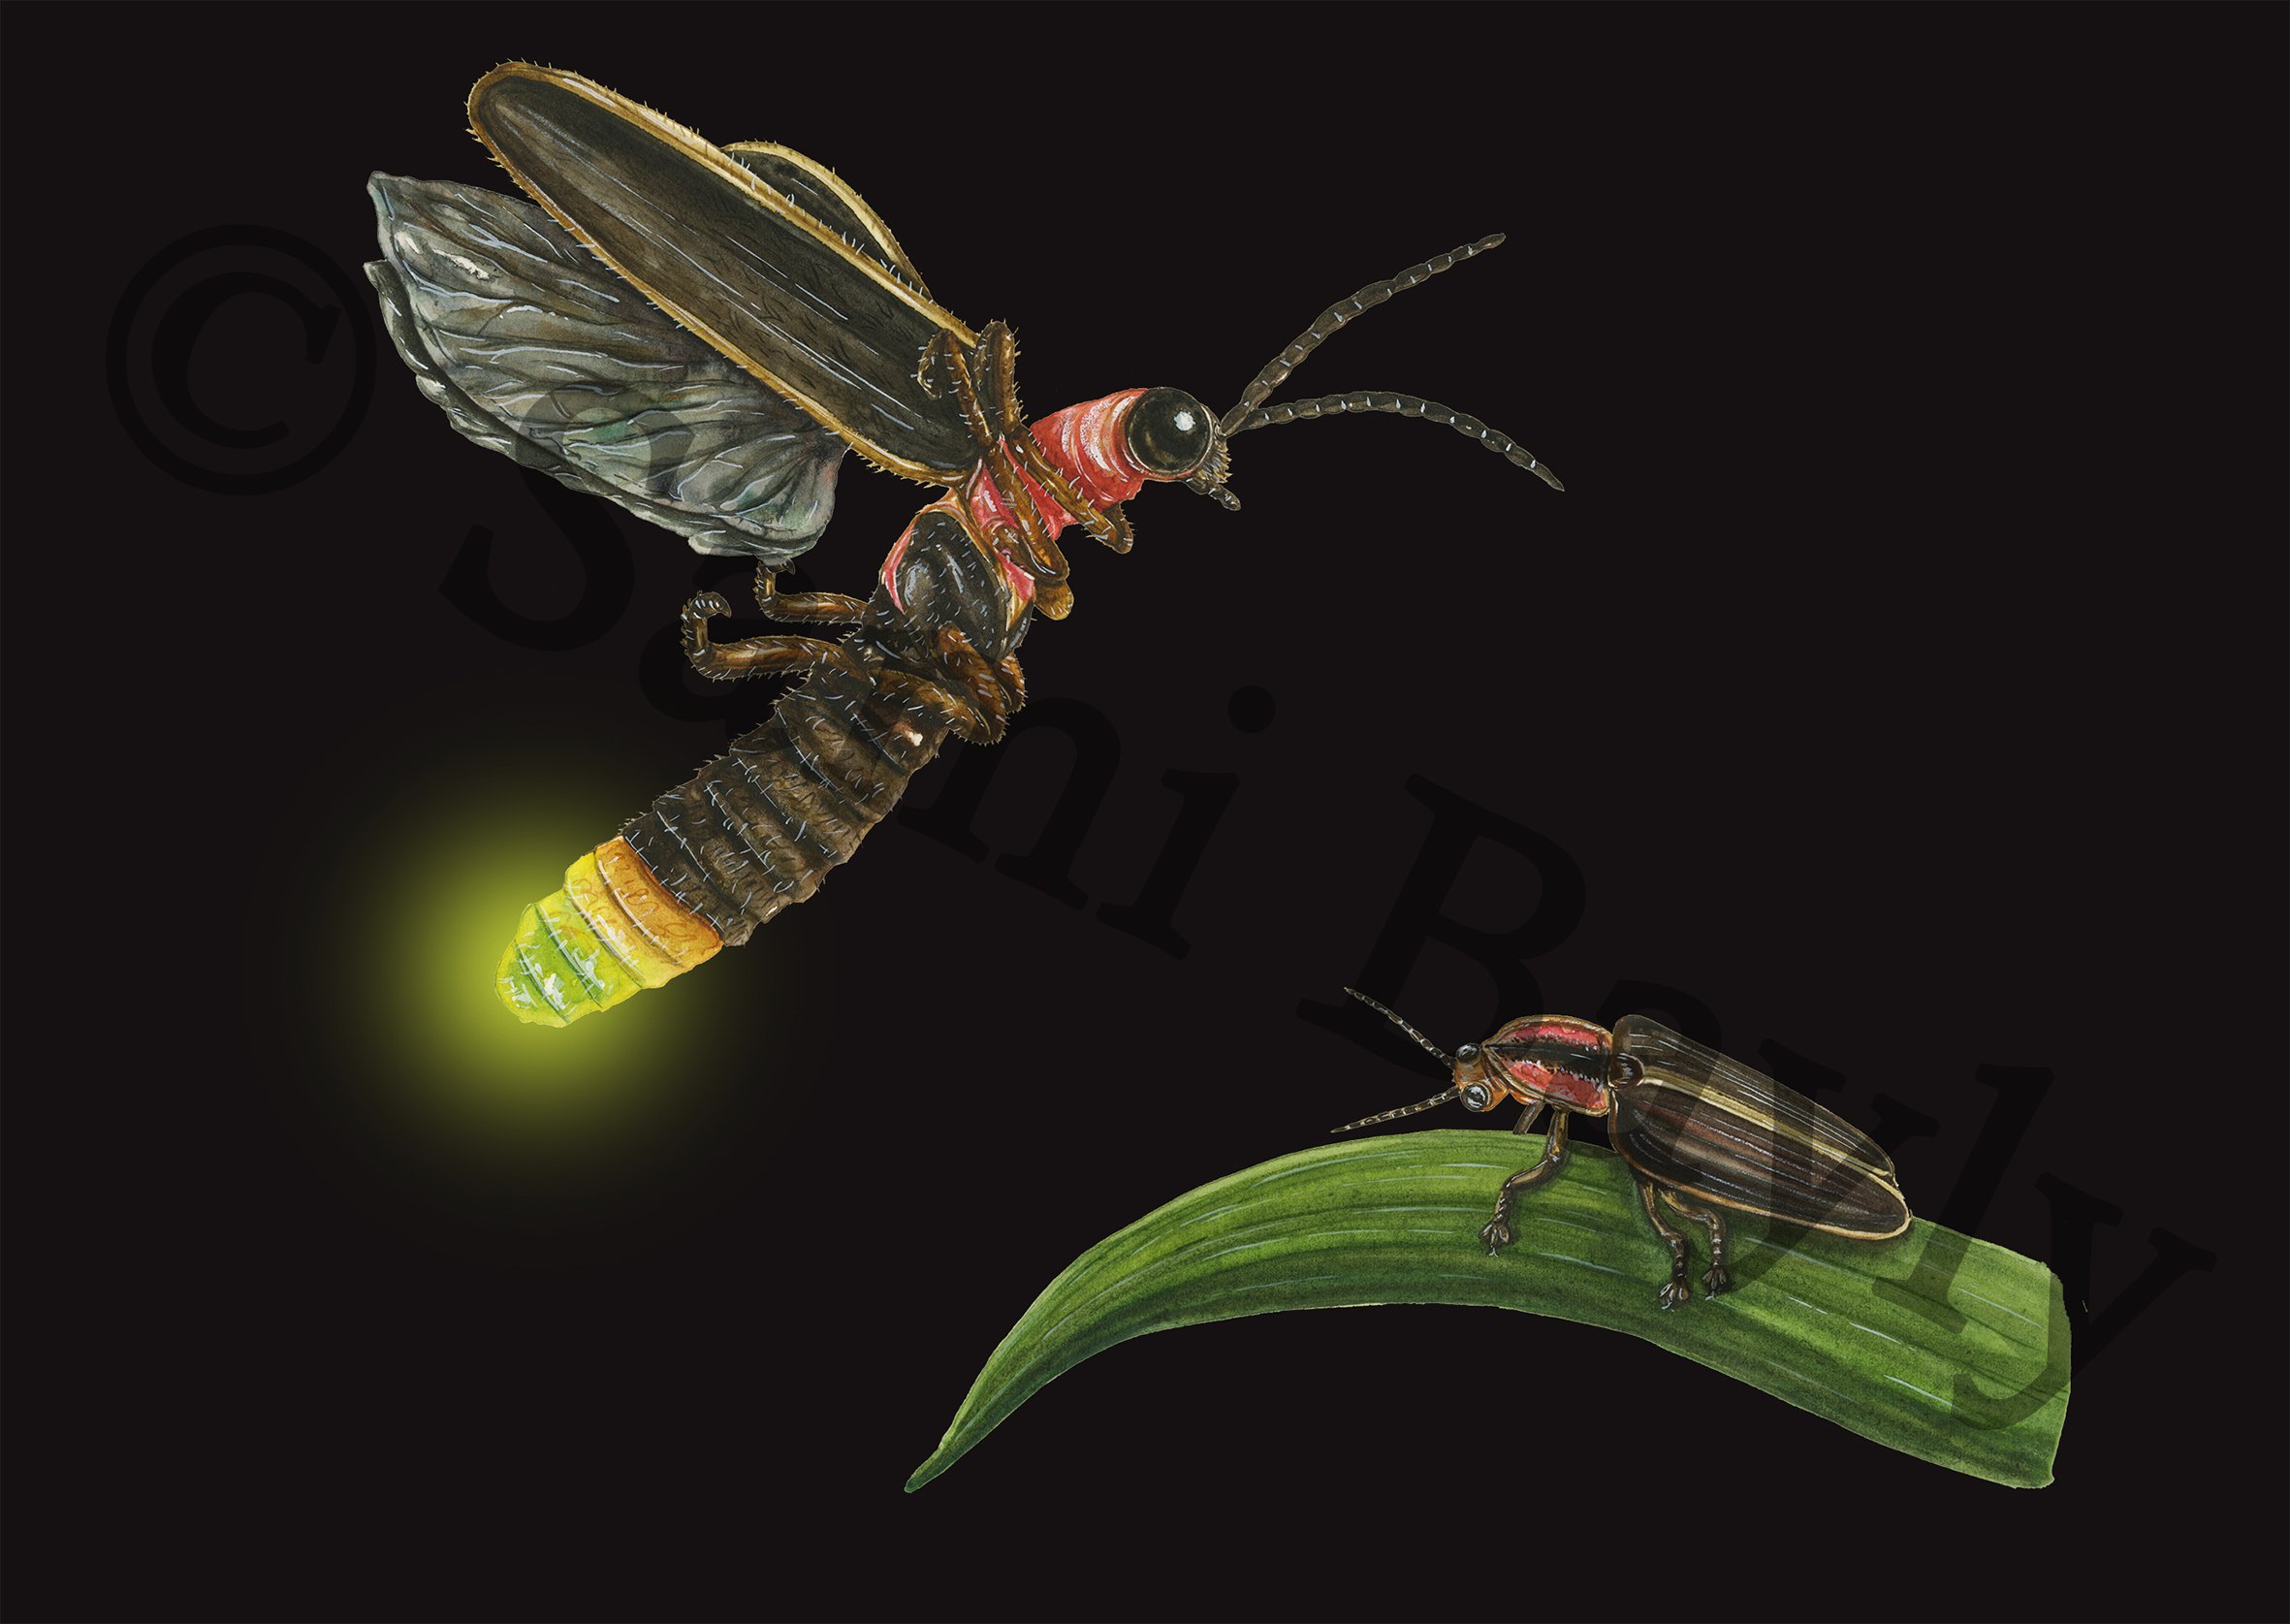 Femme Fatale Firefly and the Common Eastern Firefly Small 2.jpg